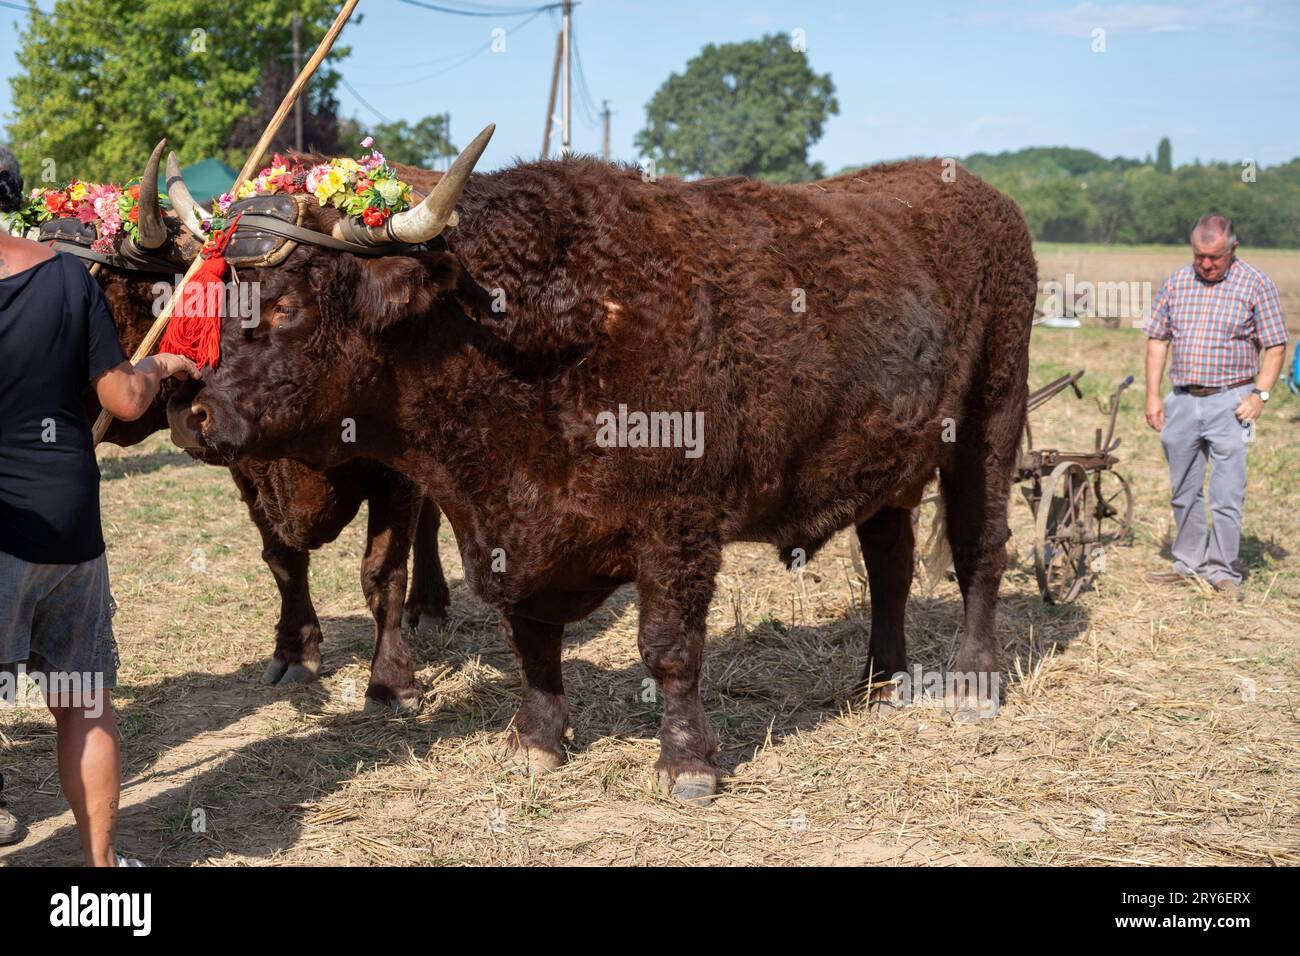 A pair of bulls being displayed at a harvest festival in France Stock Photo